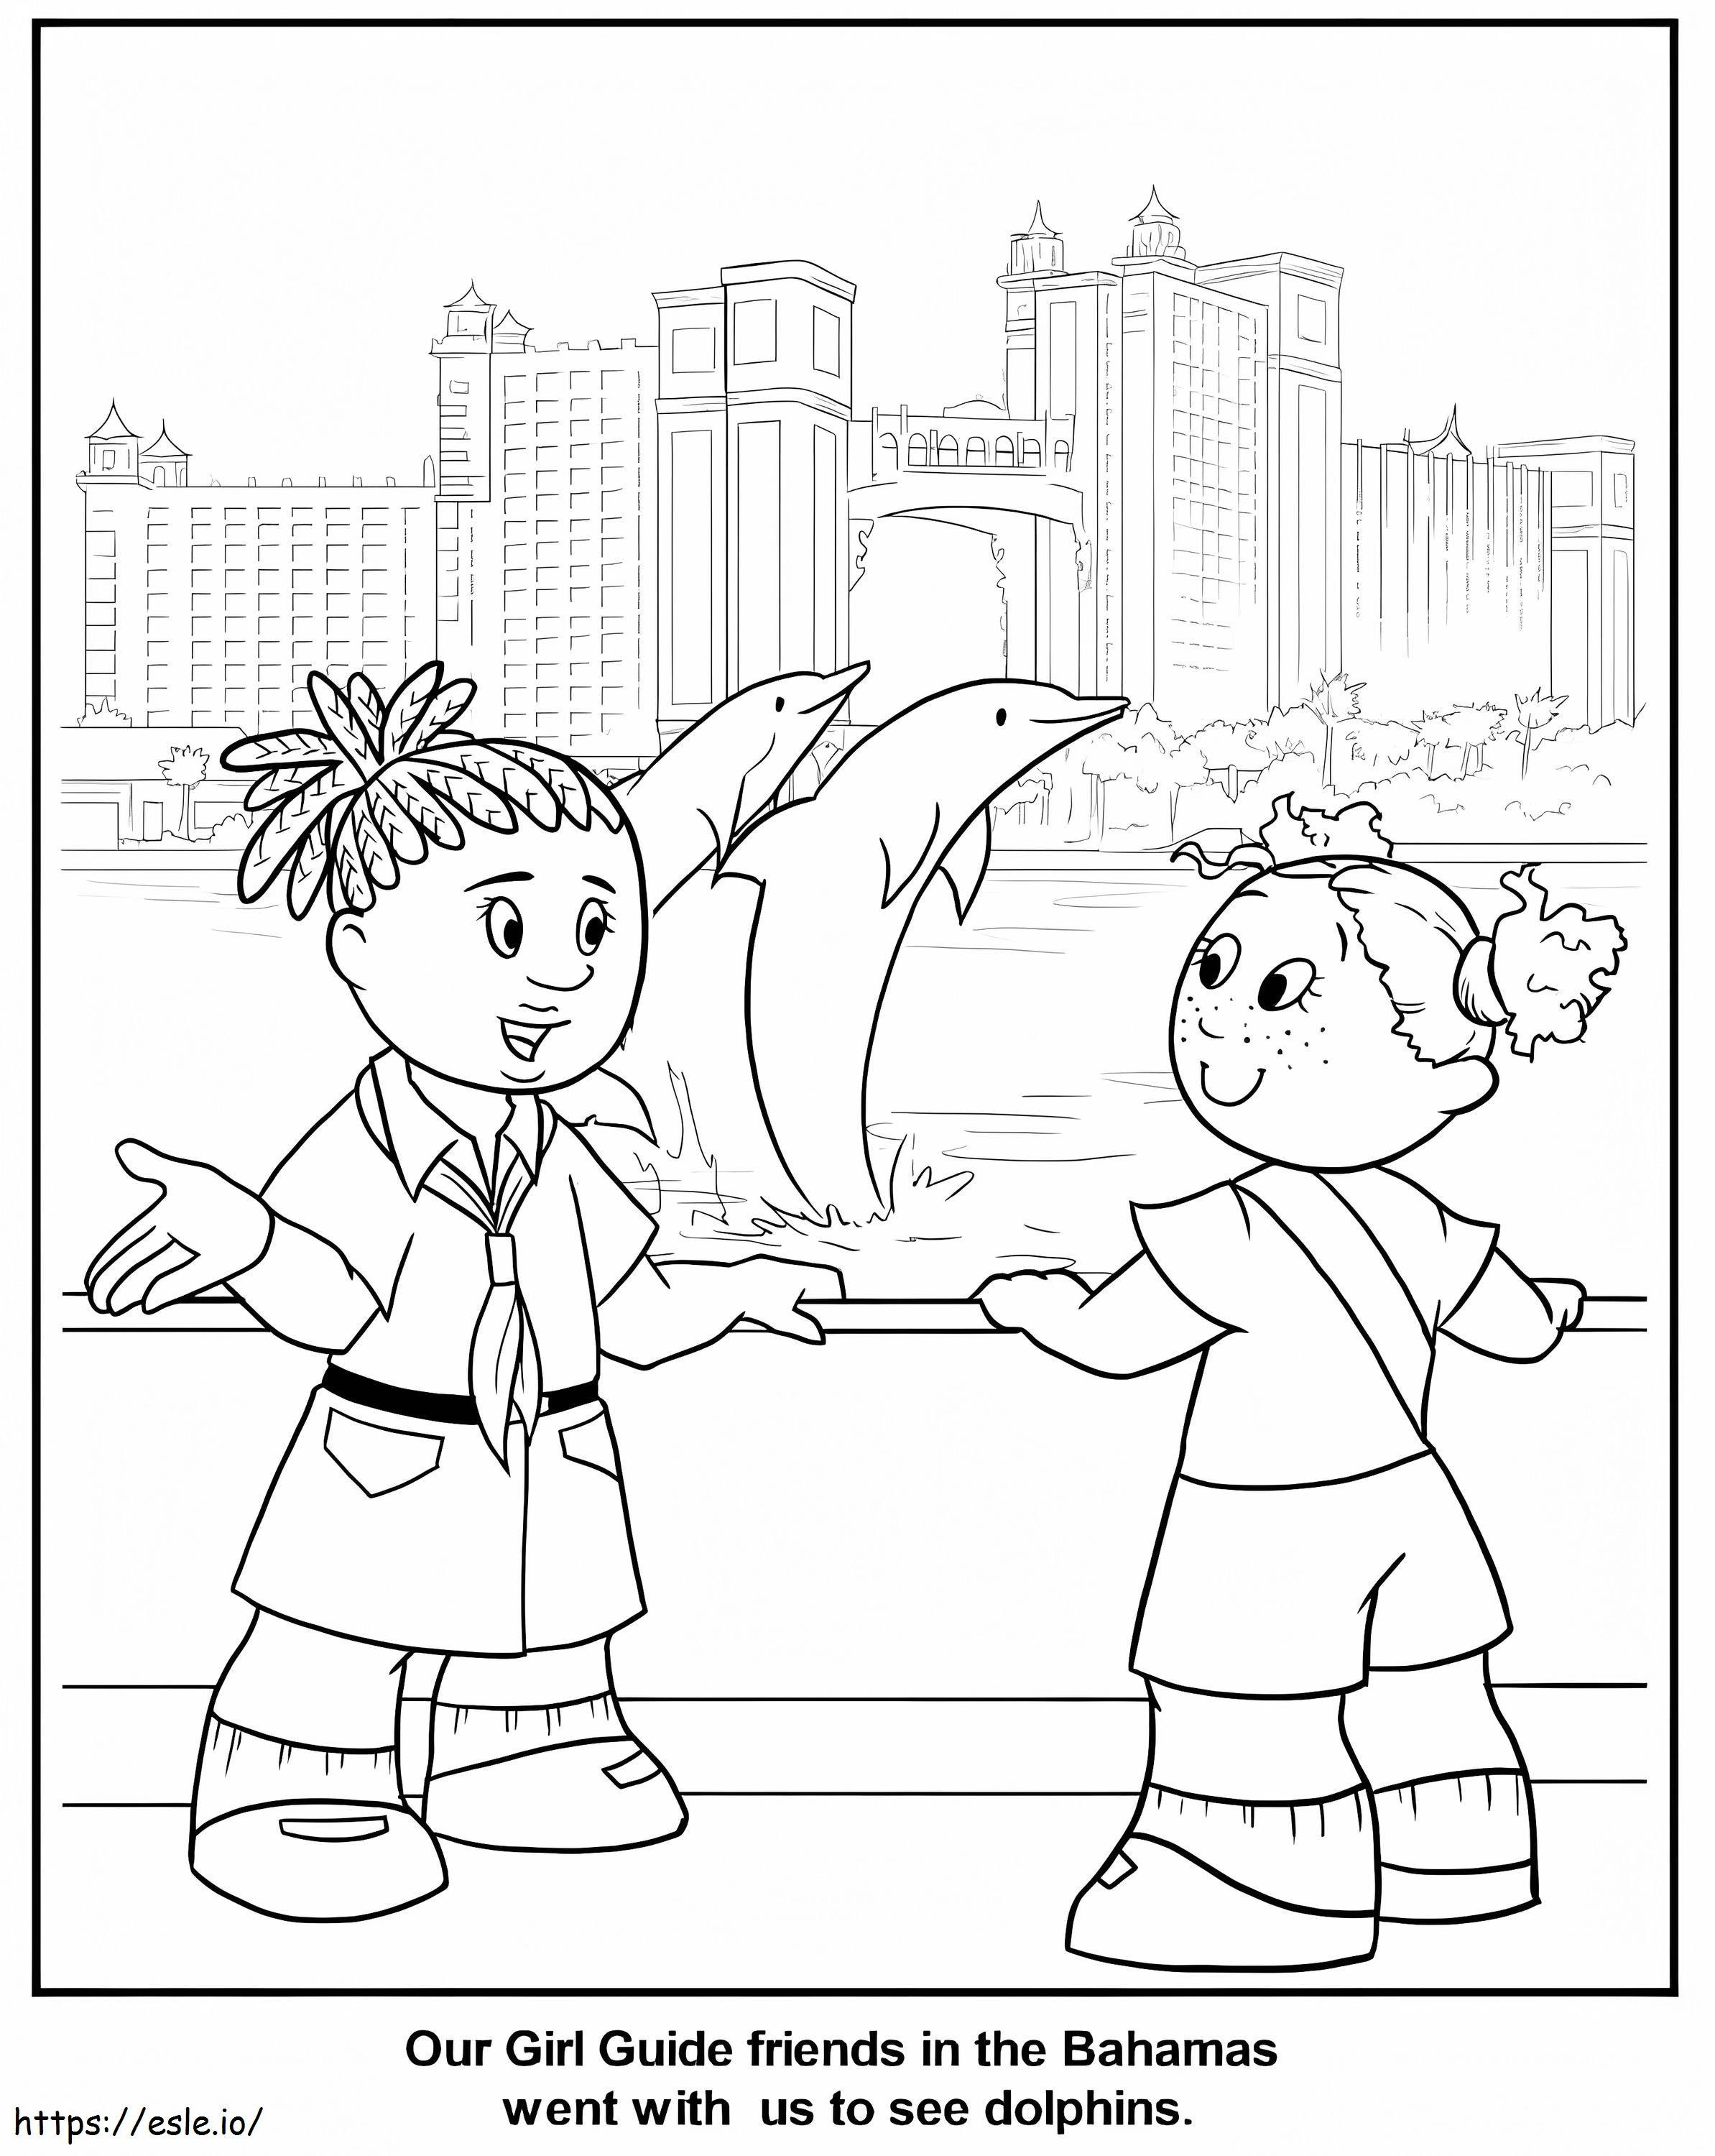 Bahamian Girl Guide coloring page